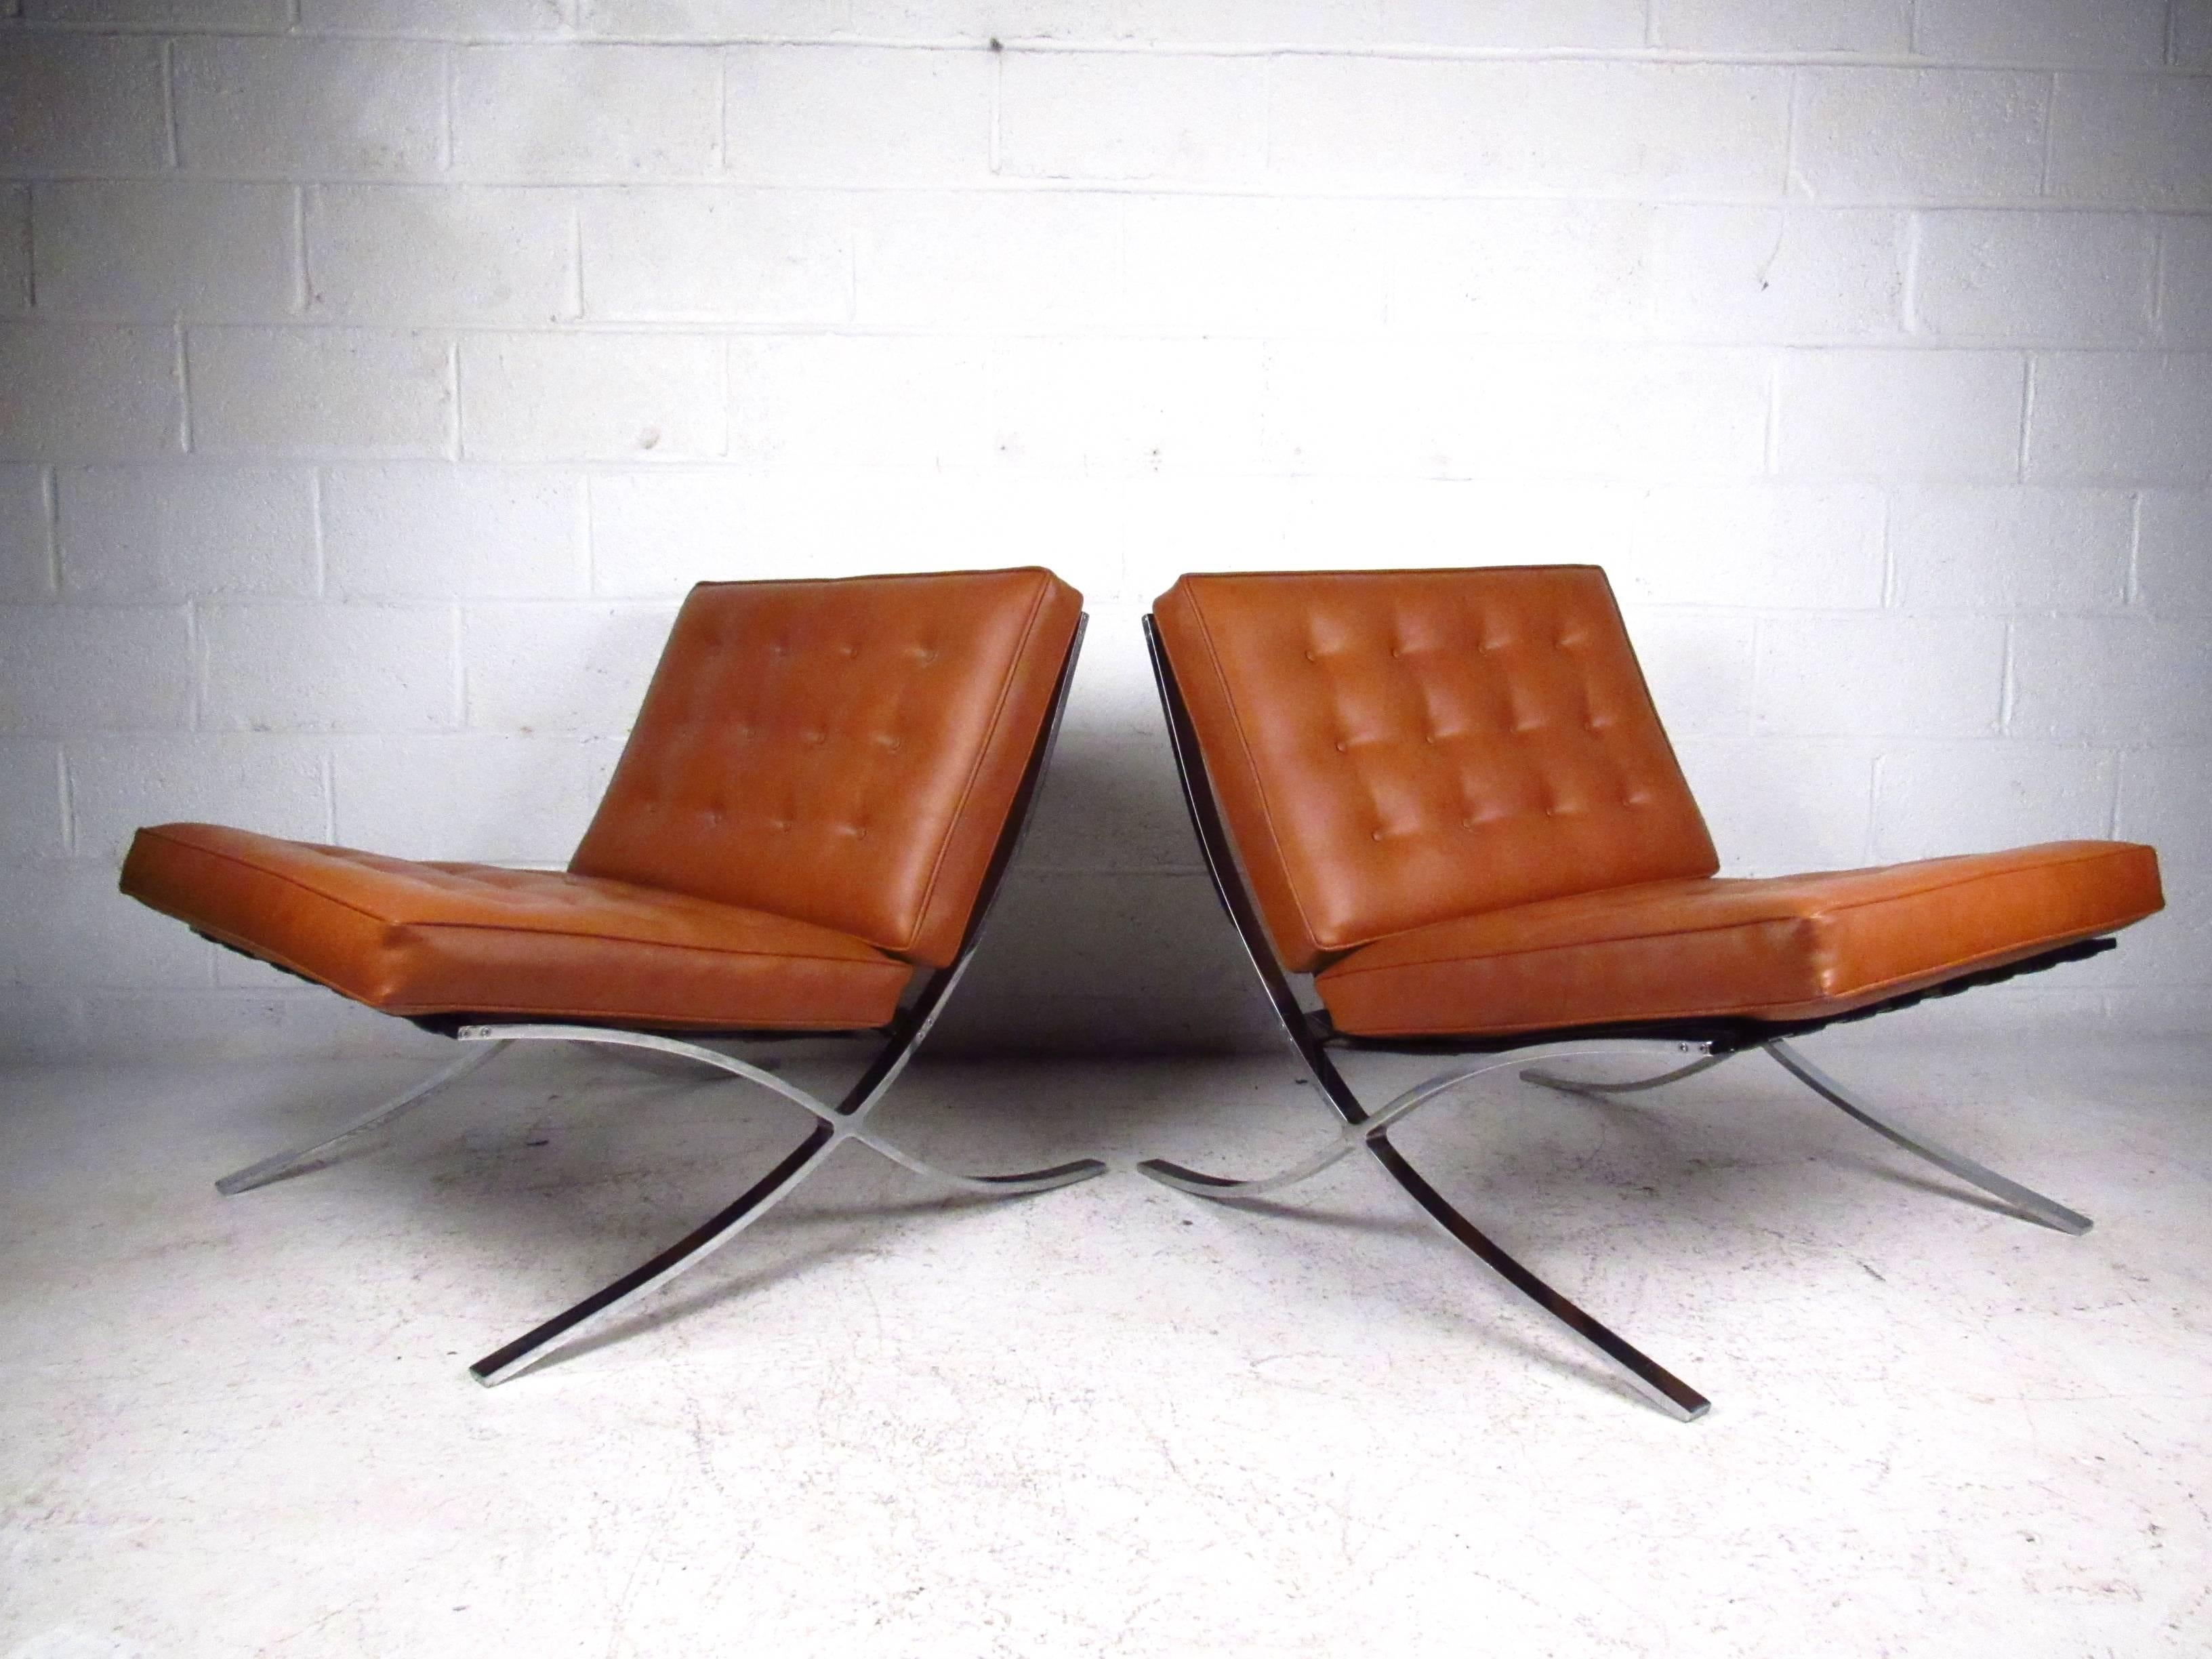 This beautiful pair of heavy chrome lounge chairs features the iconic style of Mid-Century master Mies Van Der Rohe. Tufted vinyl seats are in good condition, while strapped seat backs add to the comfort of the pair. Please confirm item location (NY